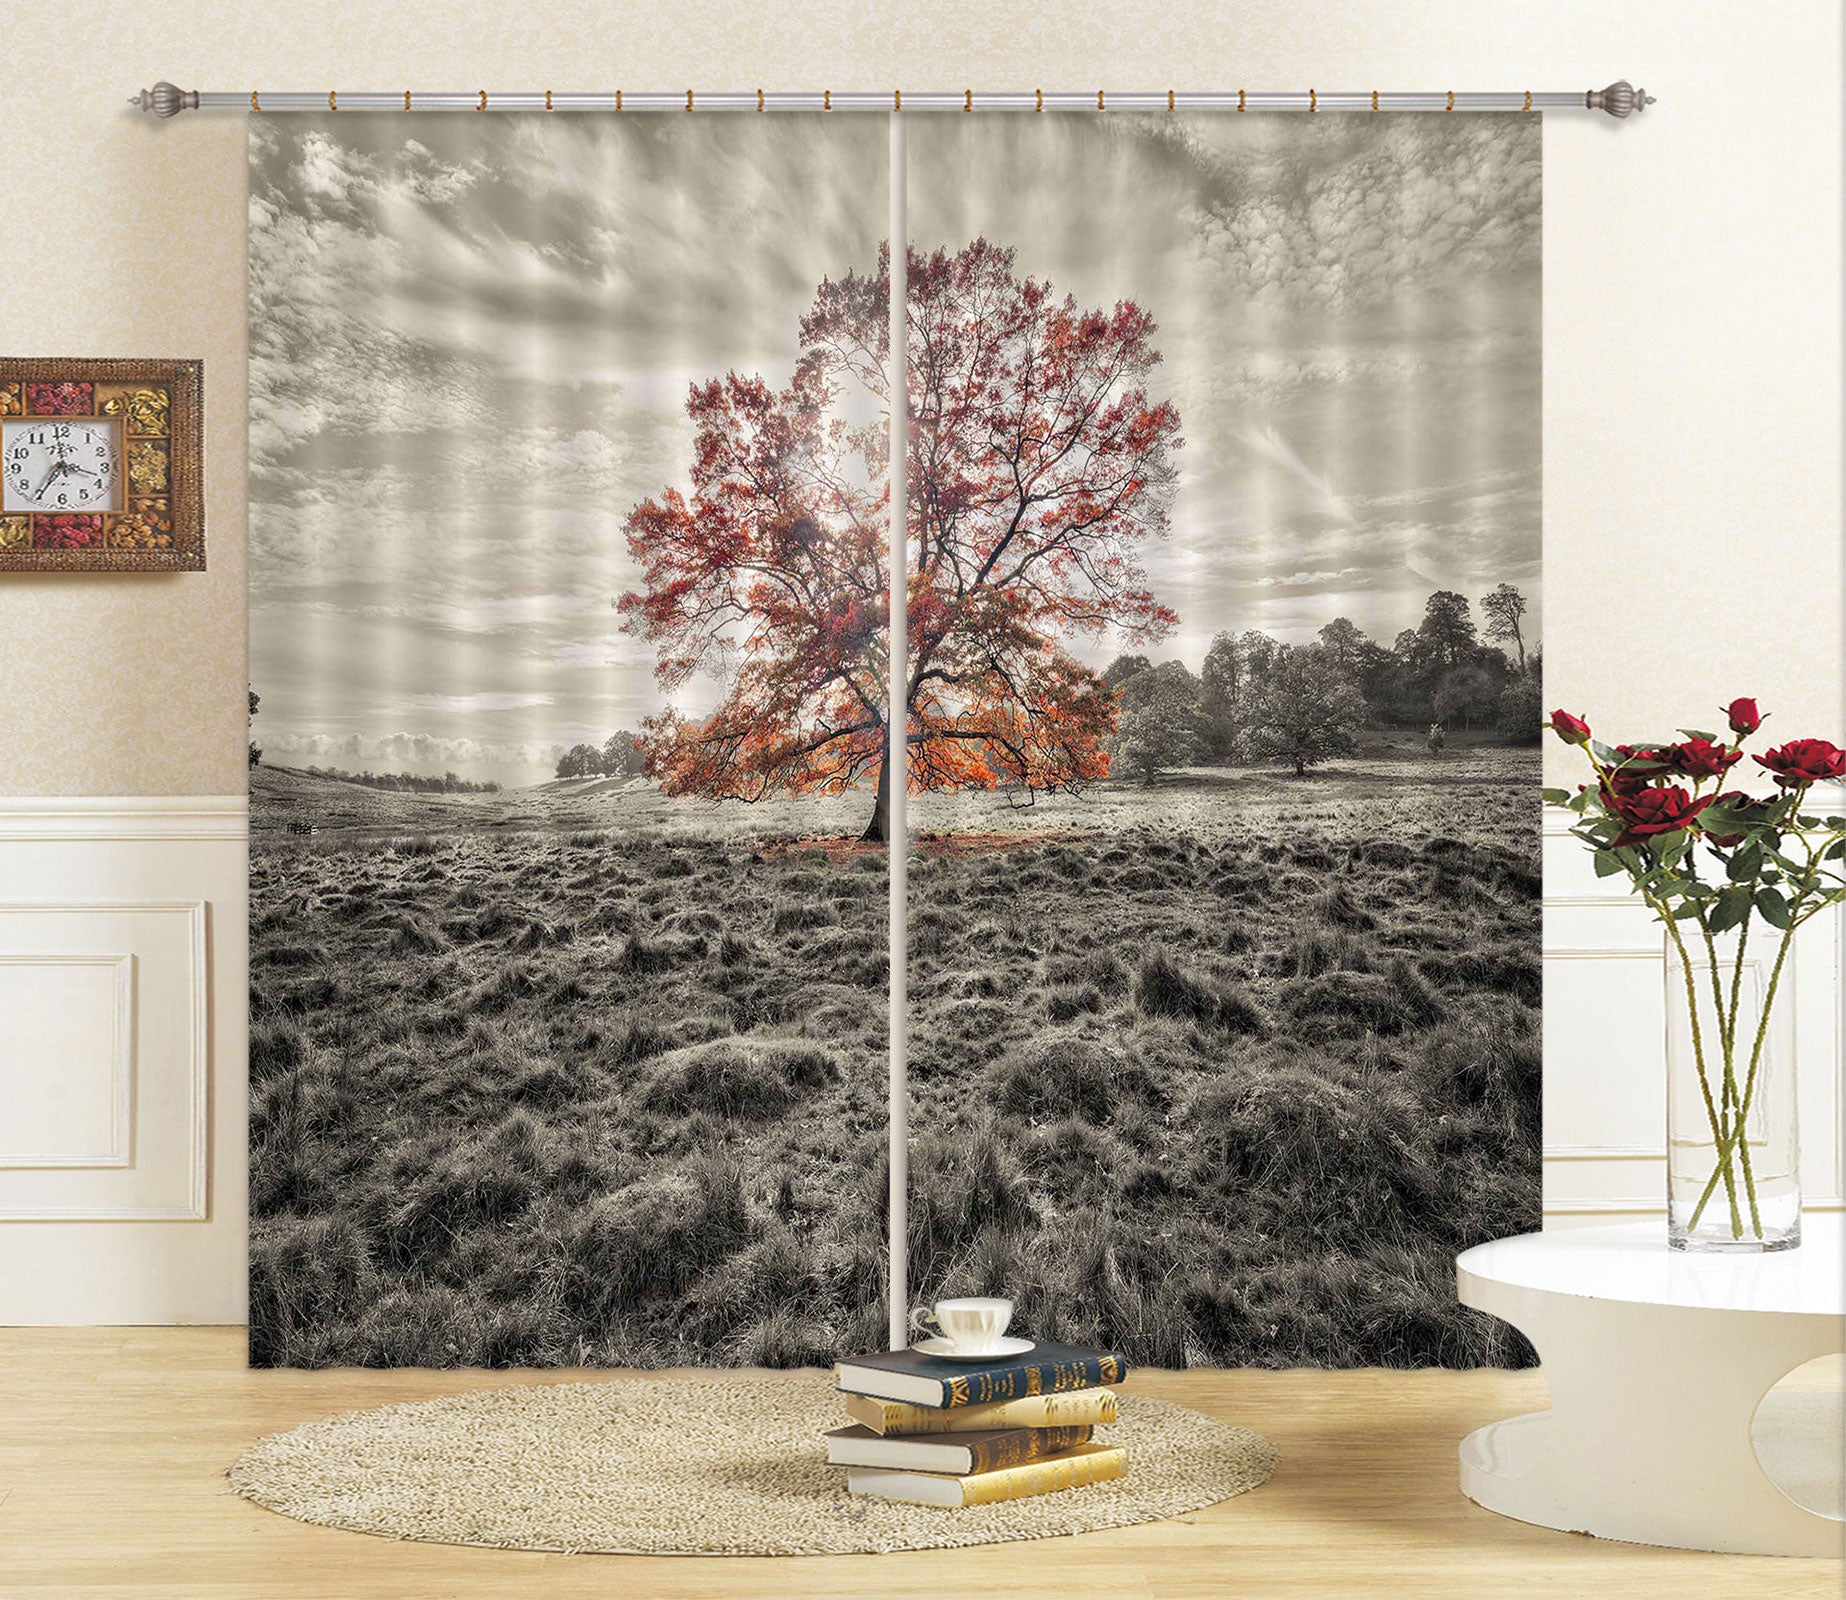 3D Red Tree 063 Assaf Frank Curtain Curtains Drapes